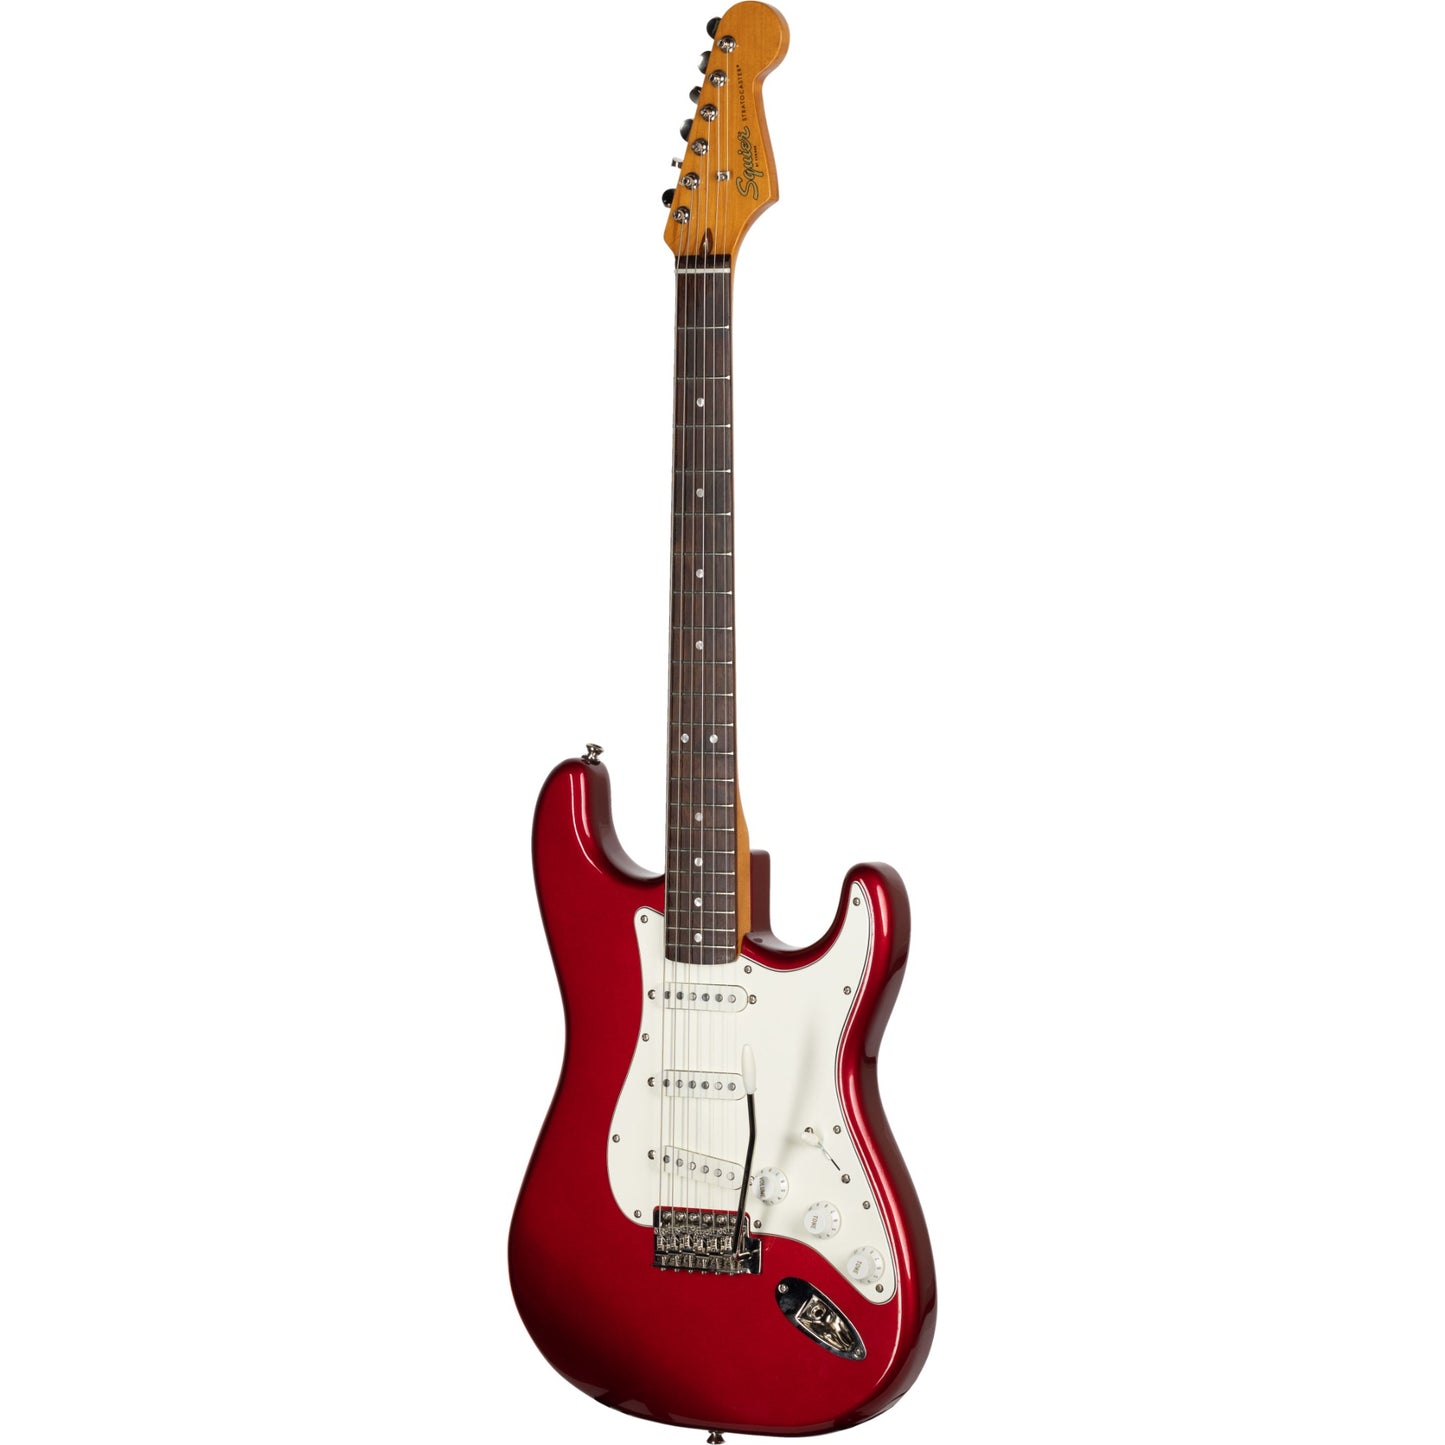 Squier Classic Vibe 60’s Stratocaster Electric Guitar in Candy Apple Red